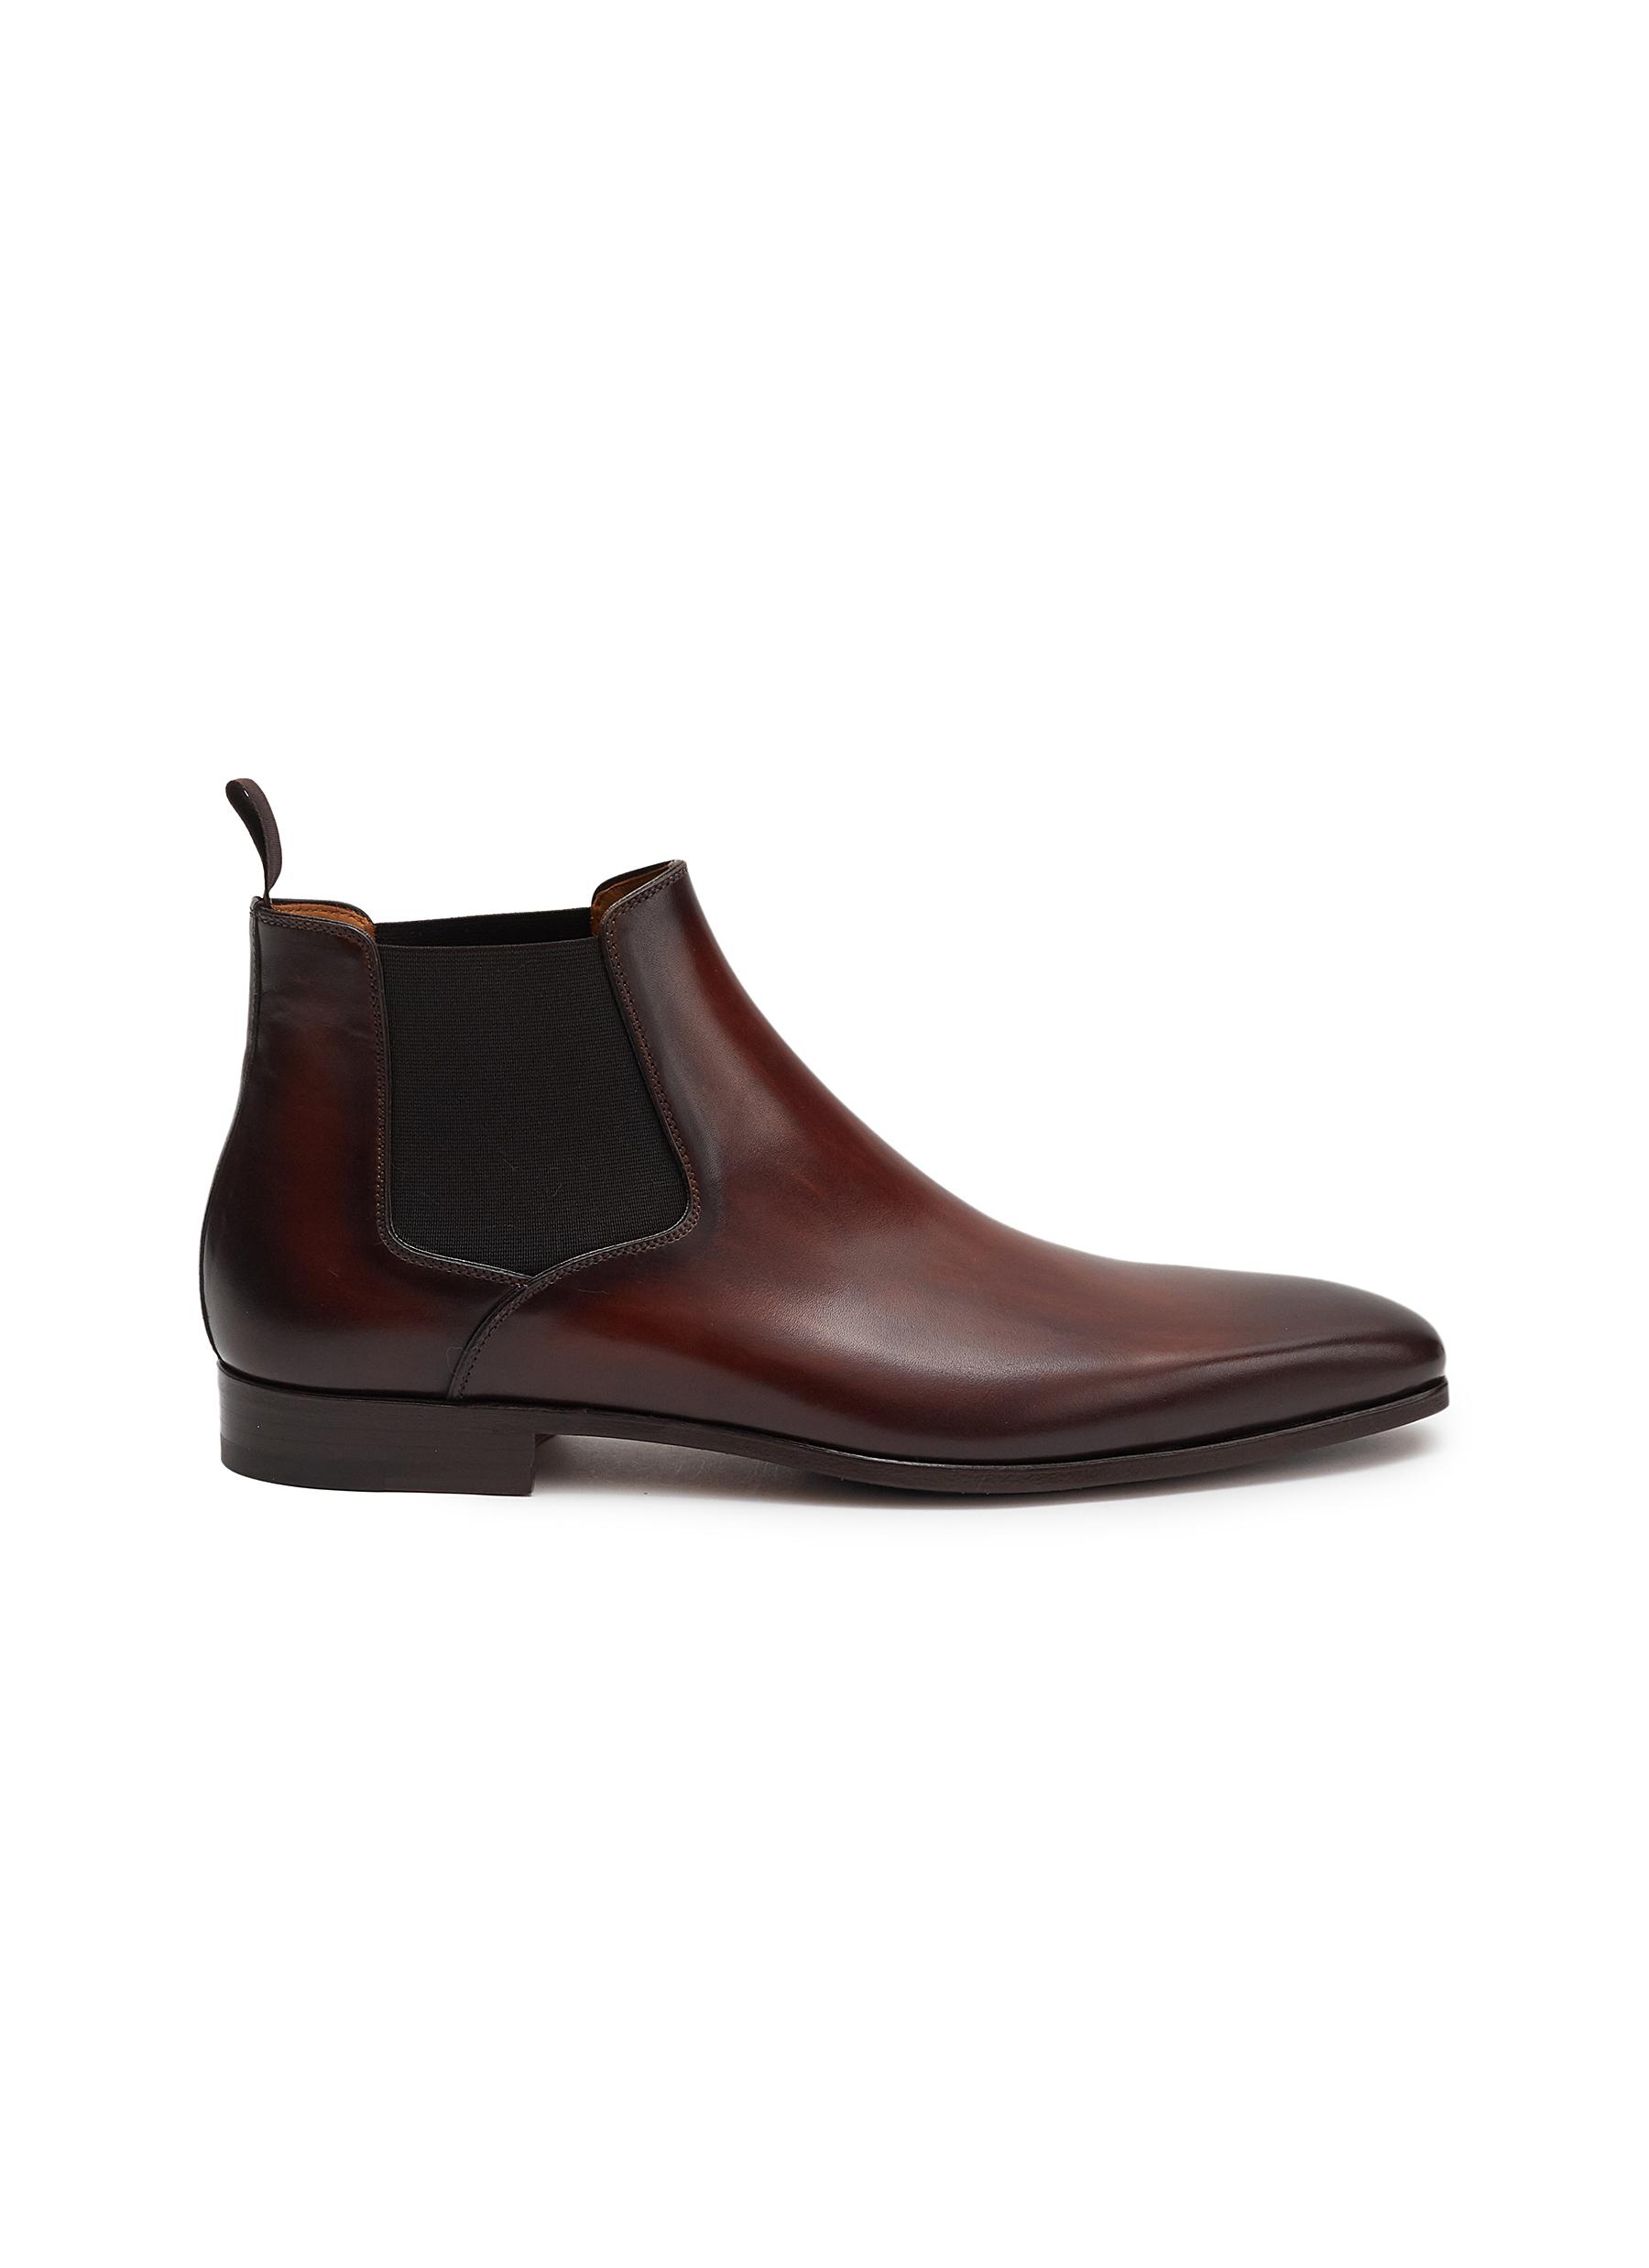 MAGNANNI Leather Chelsea Boots